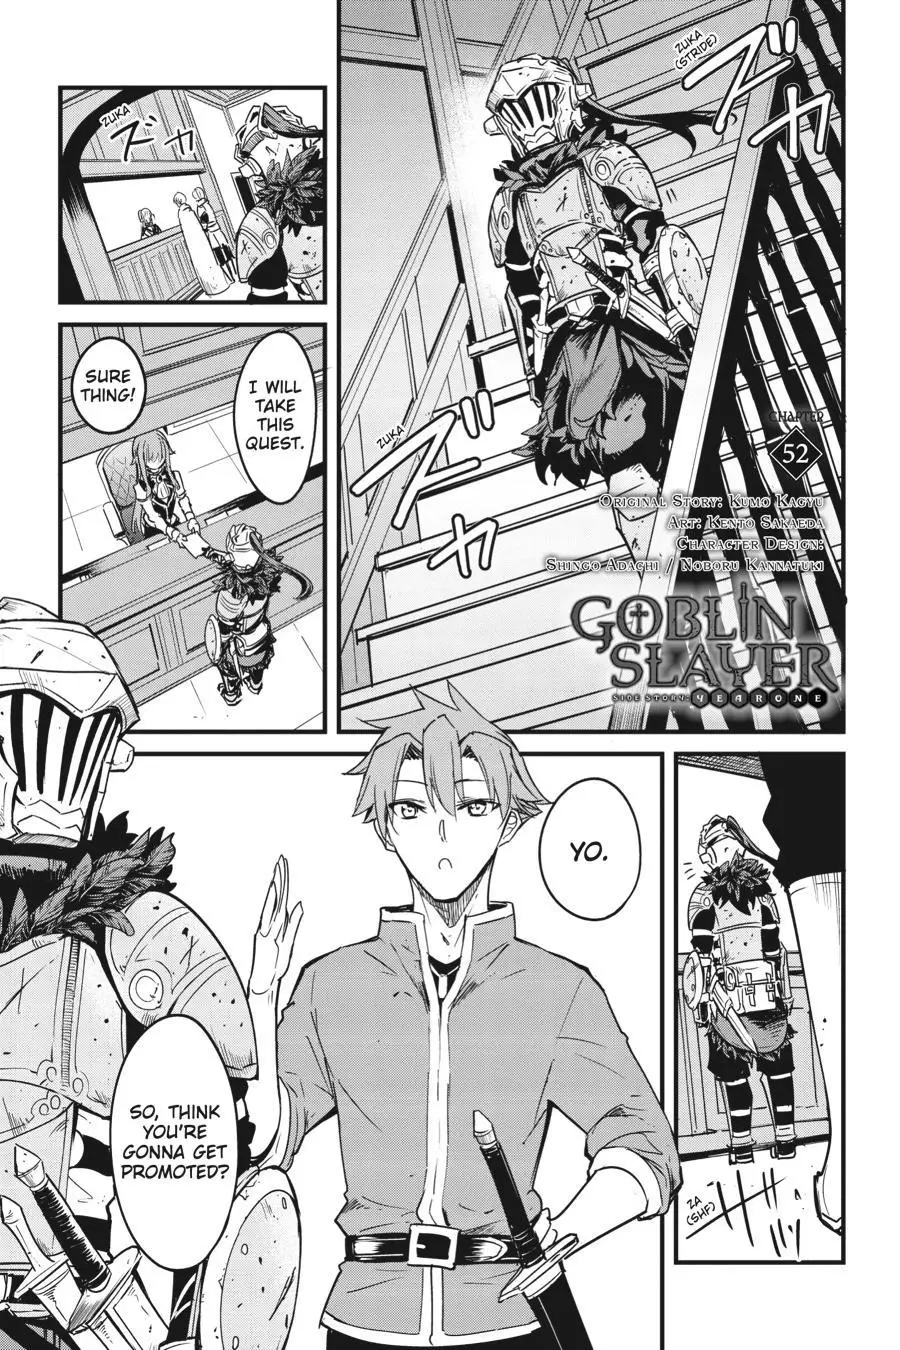 Goblin Slayer: Side Story Year One - 52 page 2